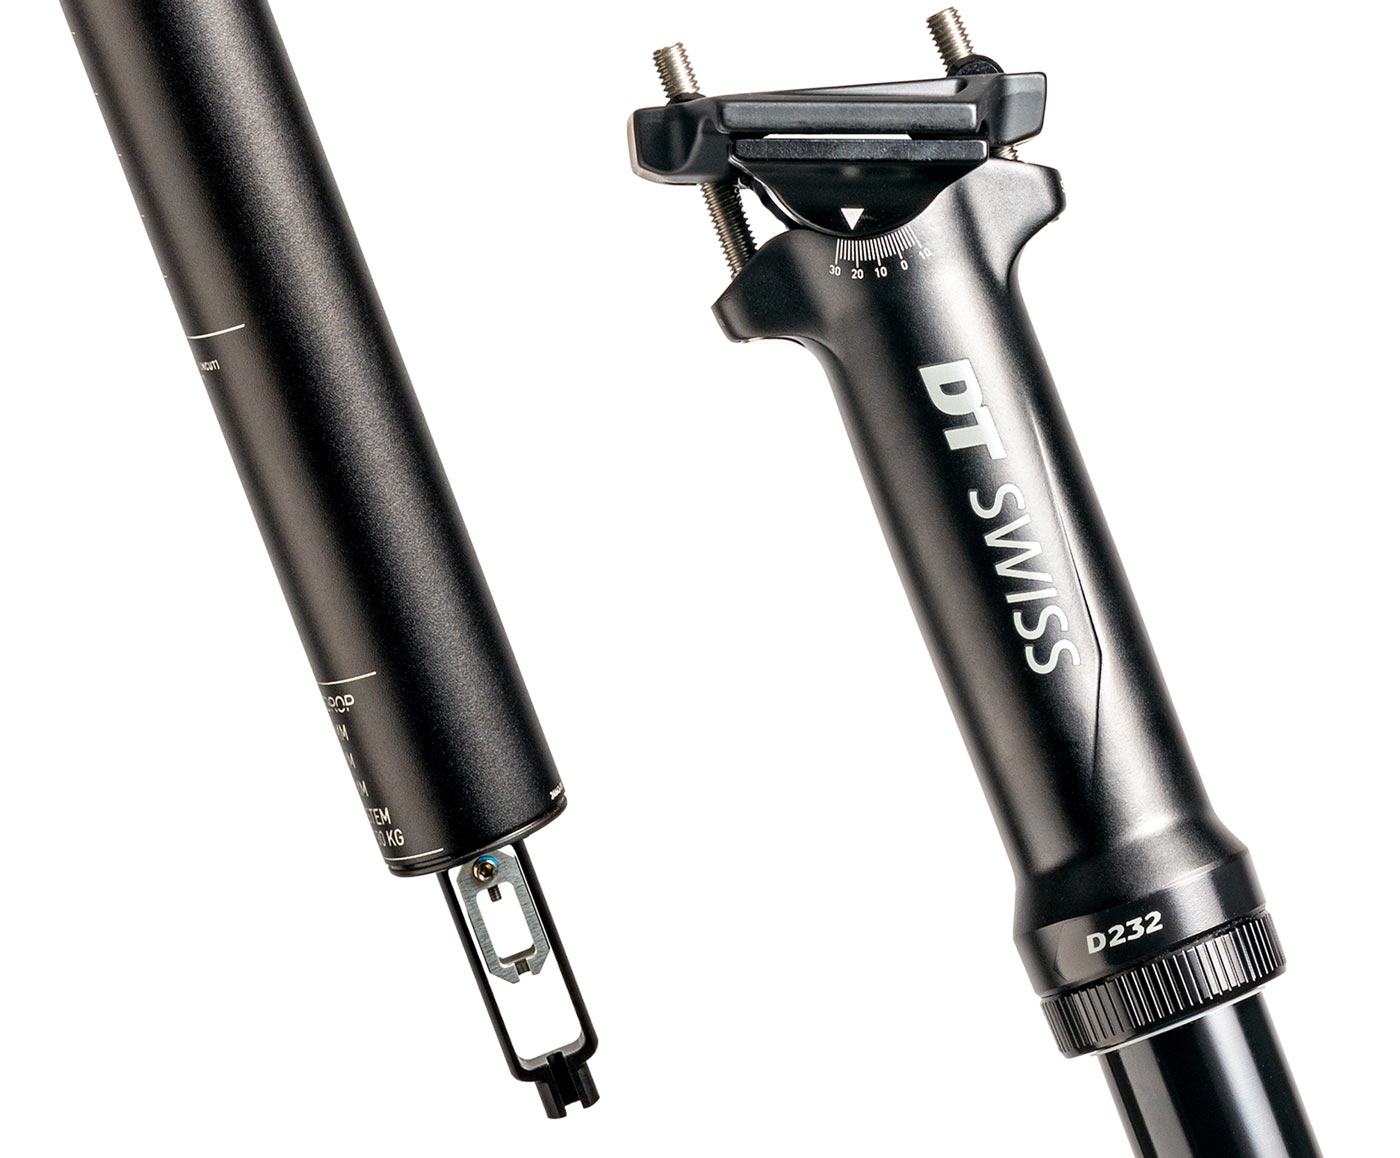 DT Swiss D 232 alloy dropper seatpost with upside down slider and alloy seat tube